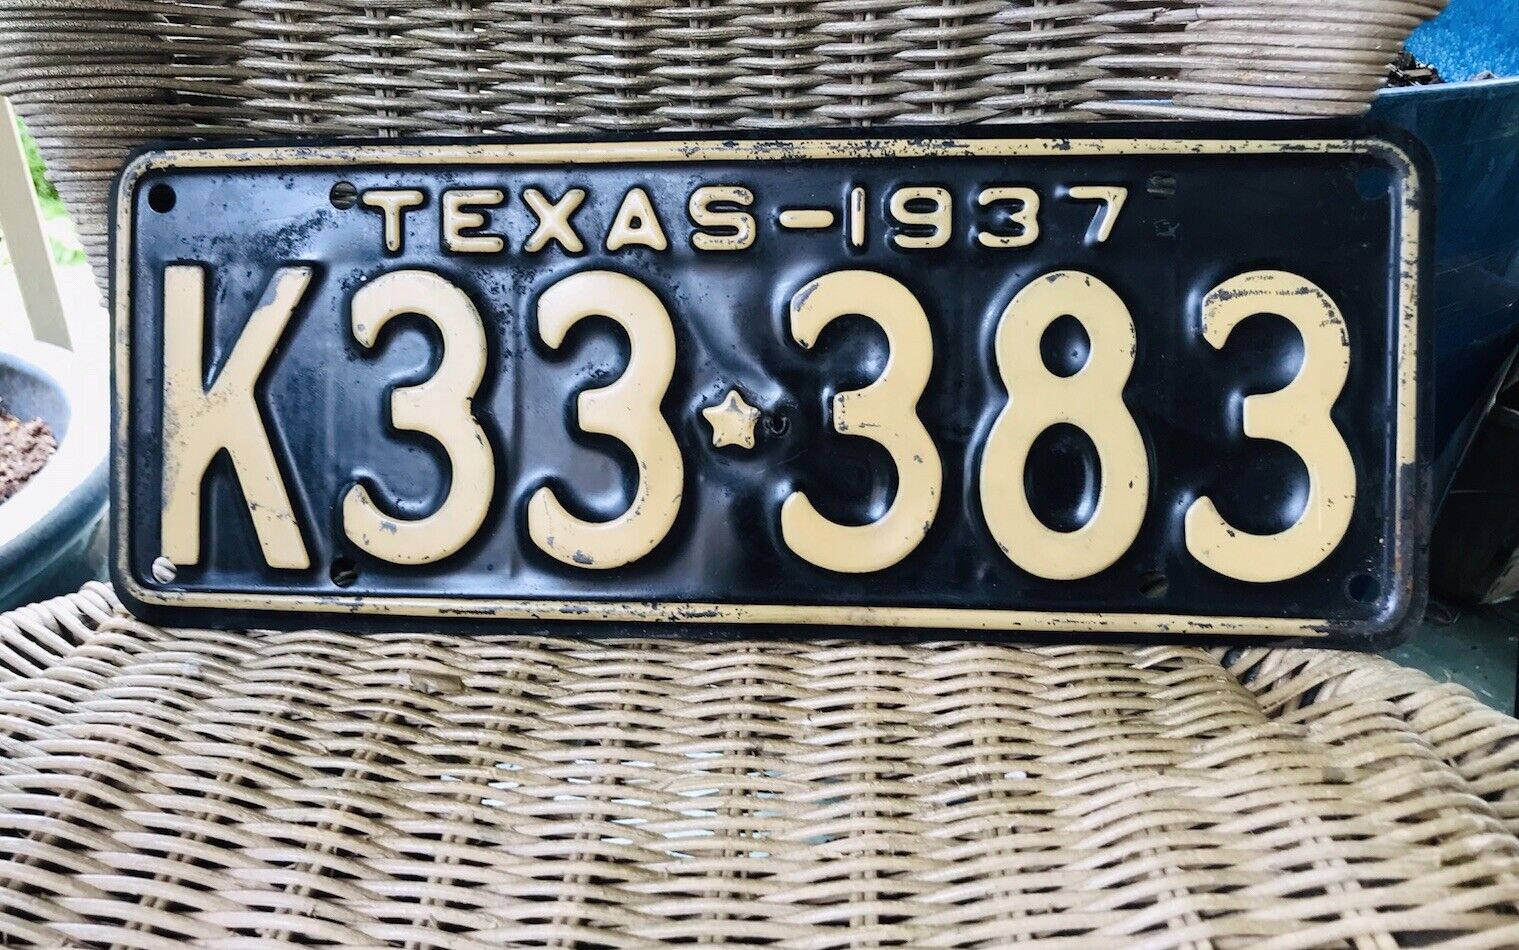 Texas 1937 license plate Lone star state